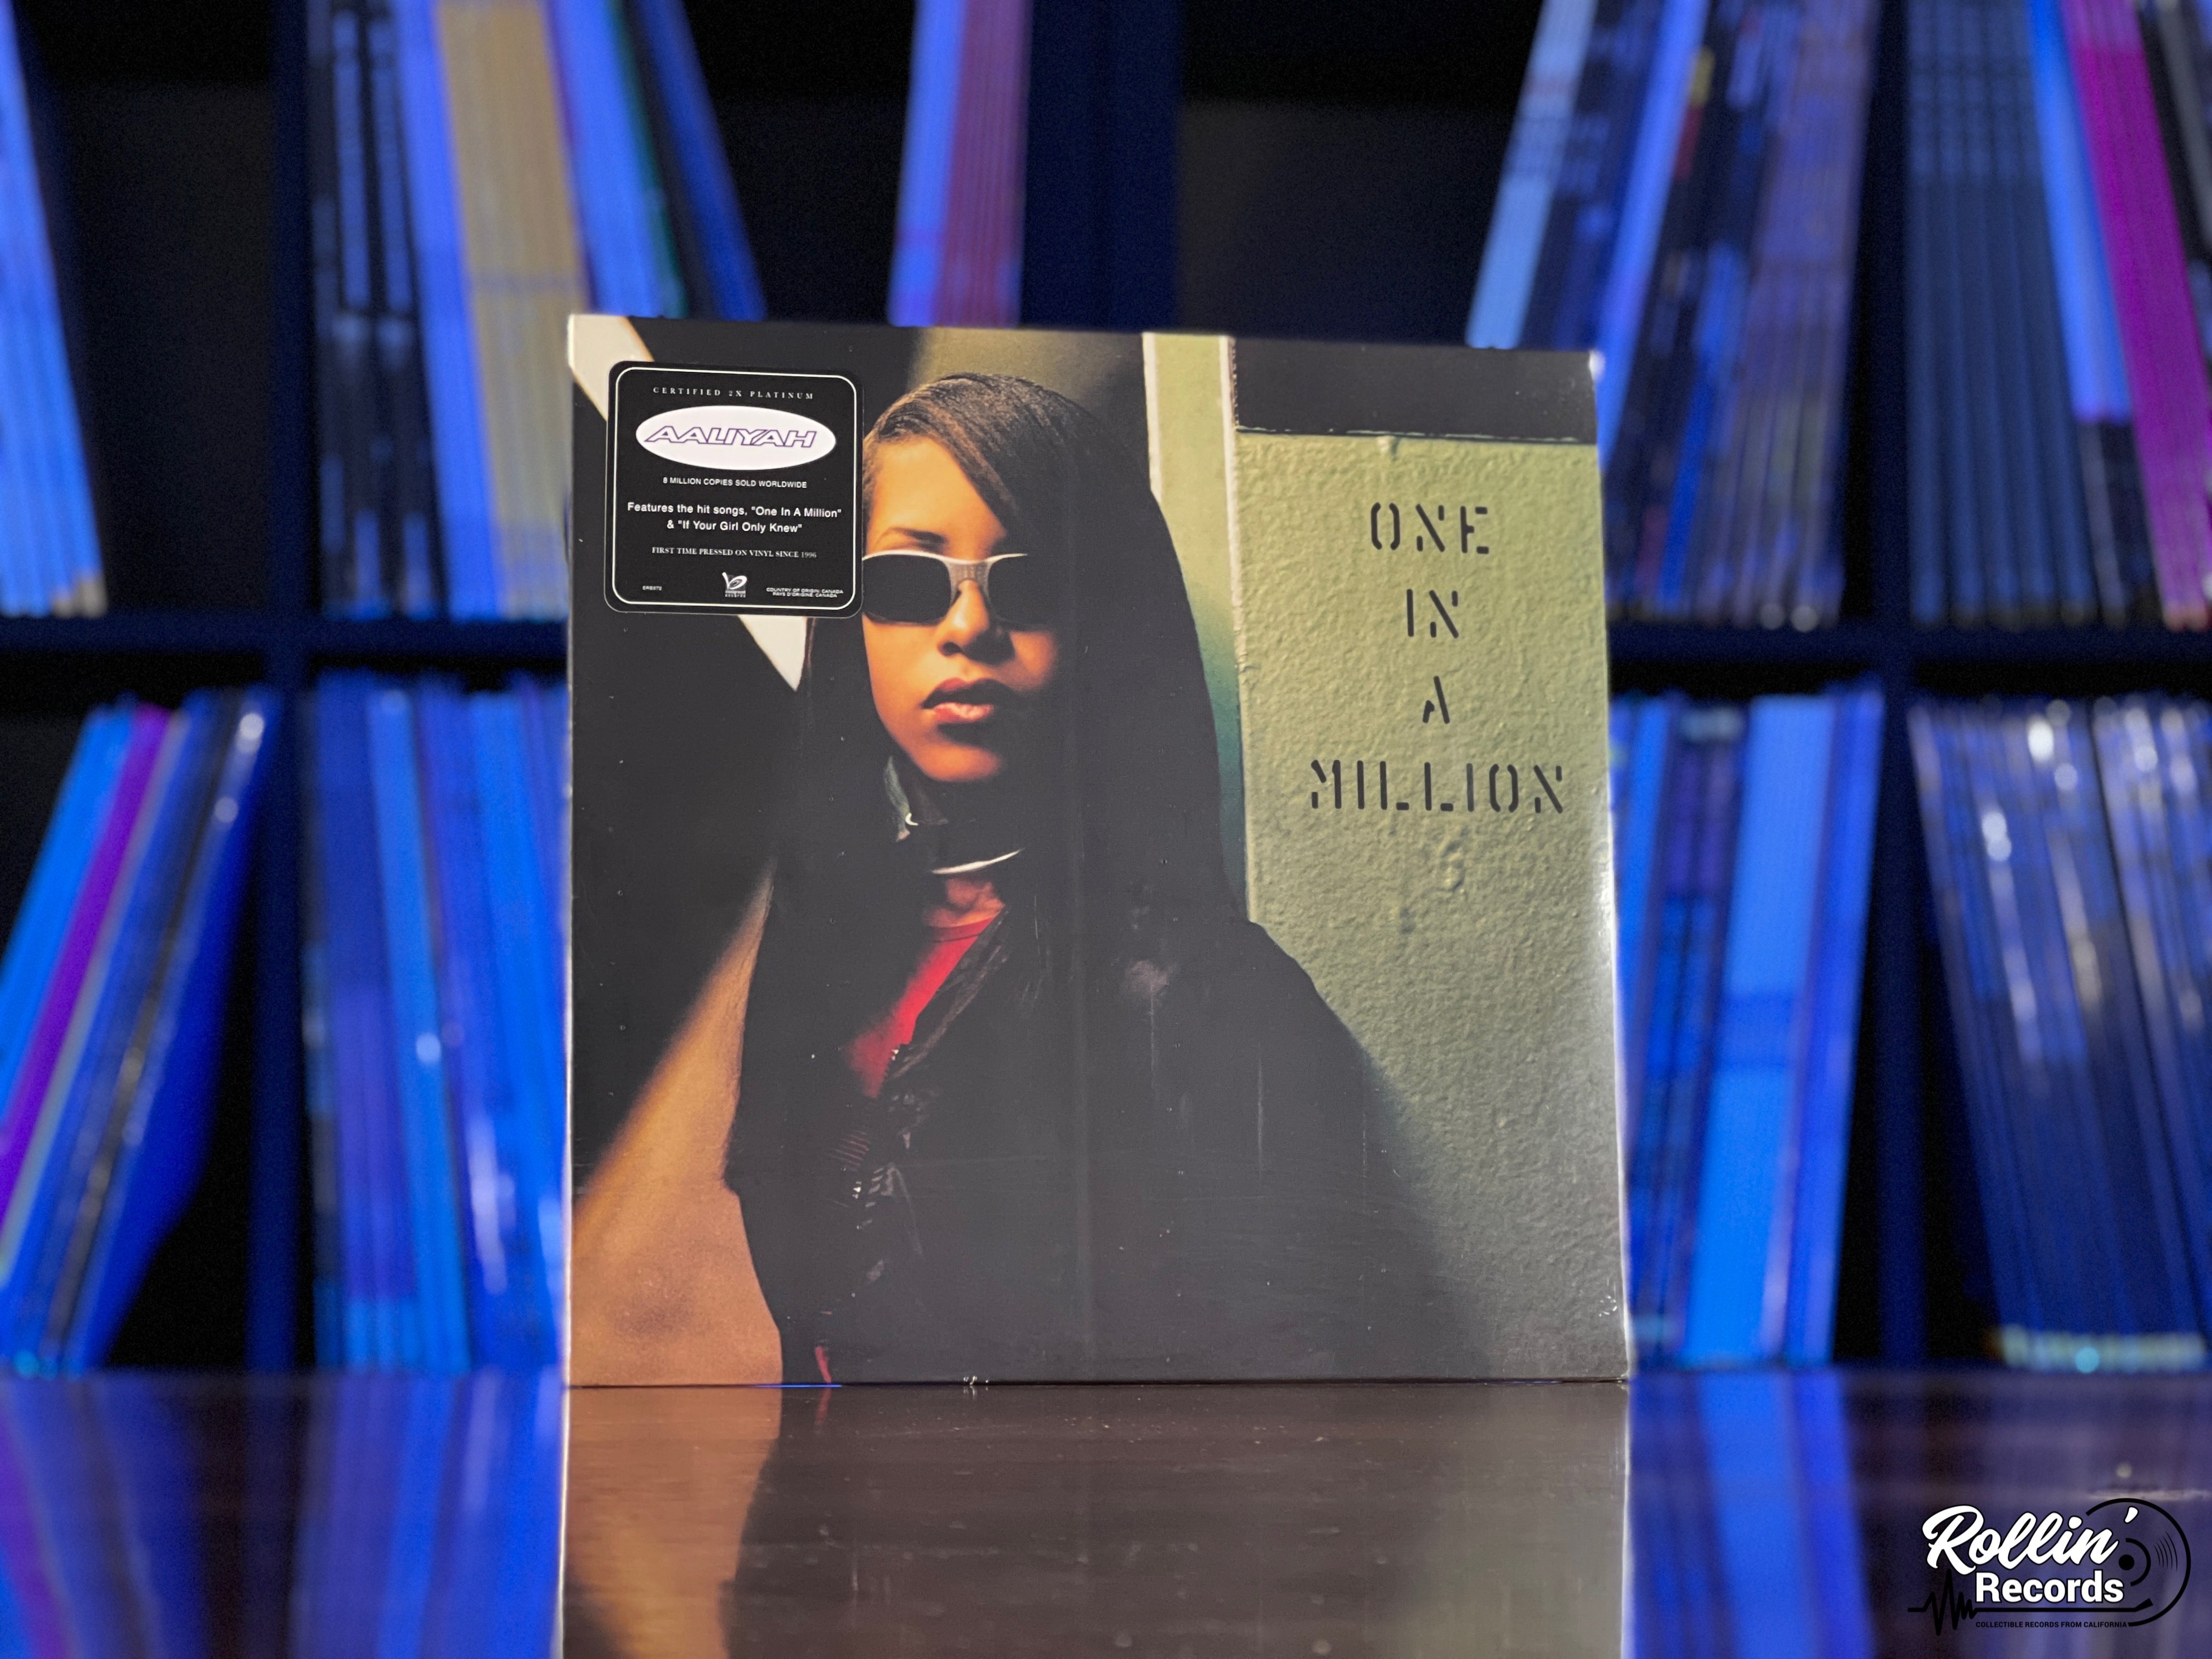 Million　One　Aaliyah　–　In　A　Rollin'　Records